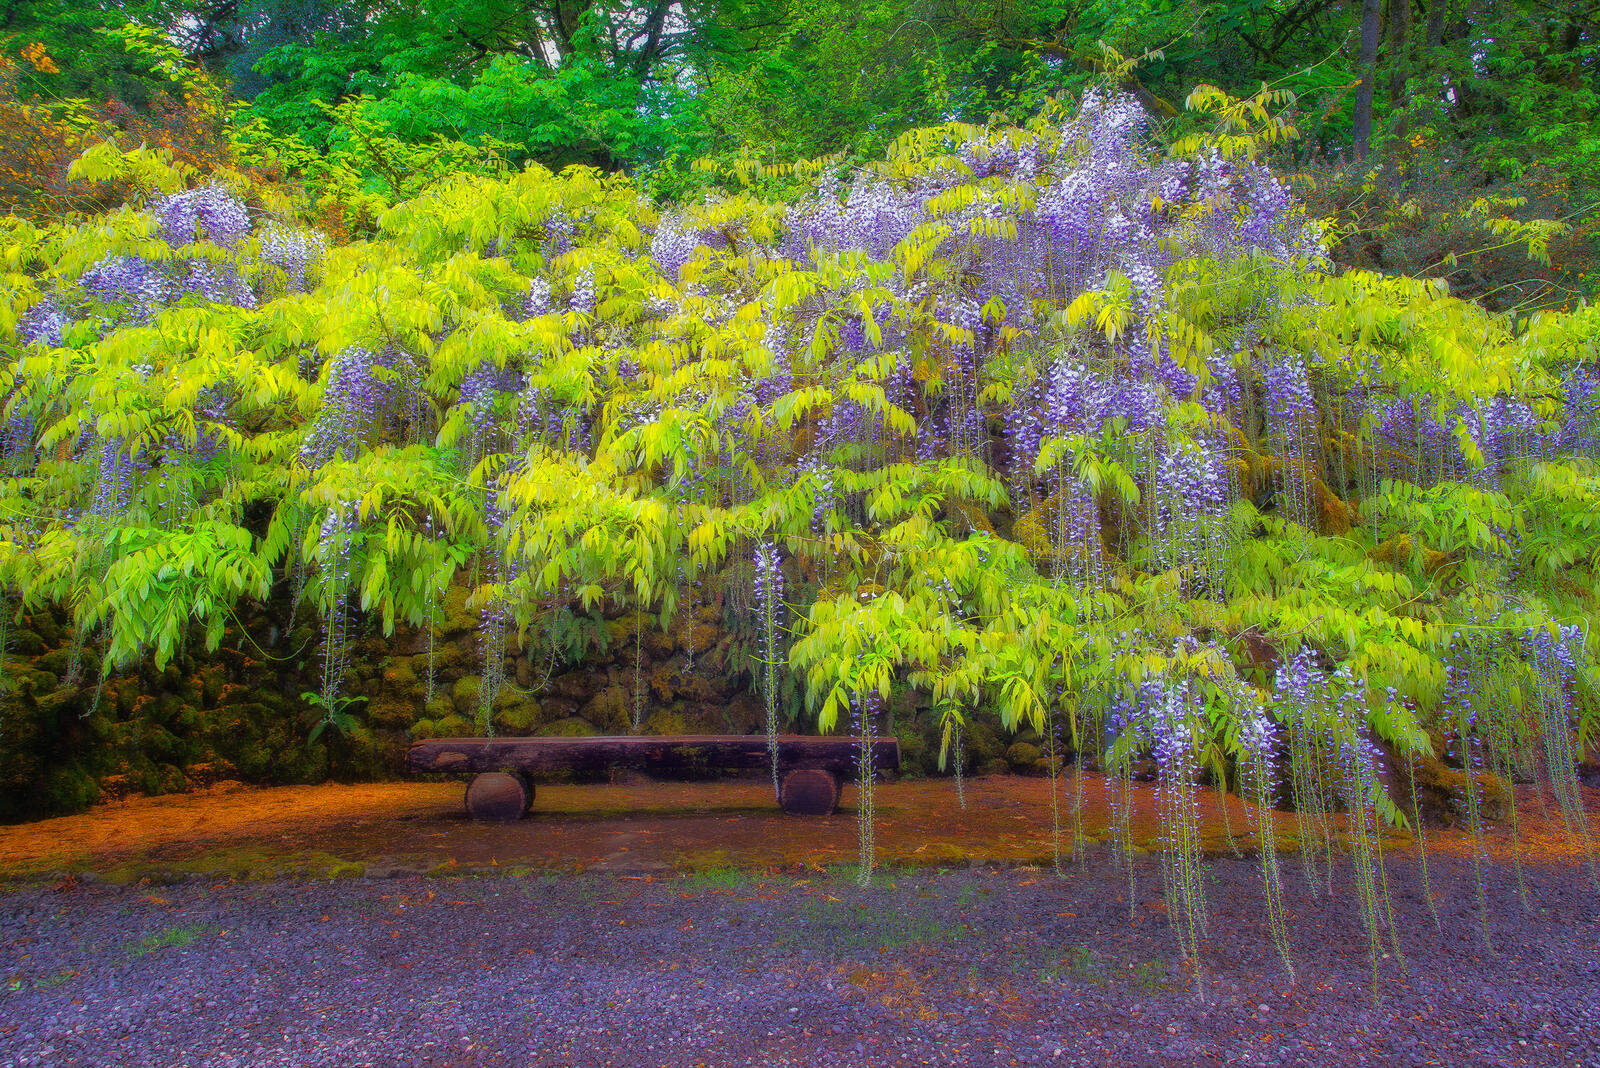 Wallpapers Wisteria flowers and leaves garden on the desktop